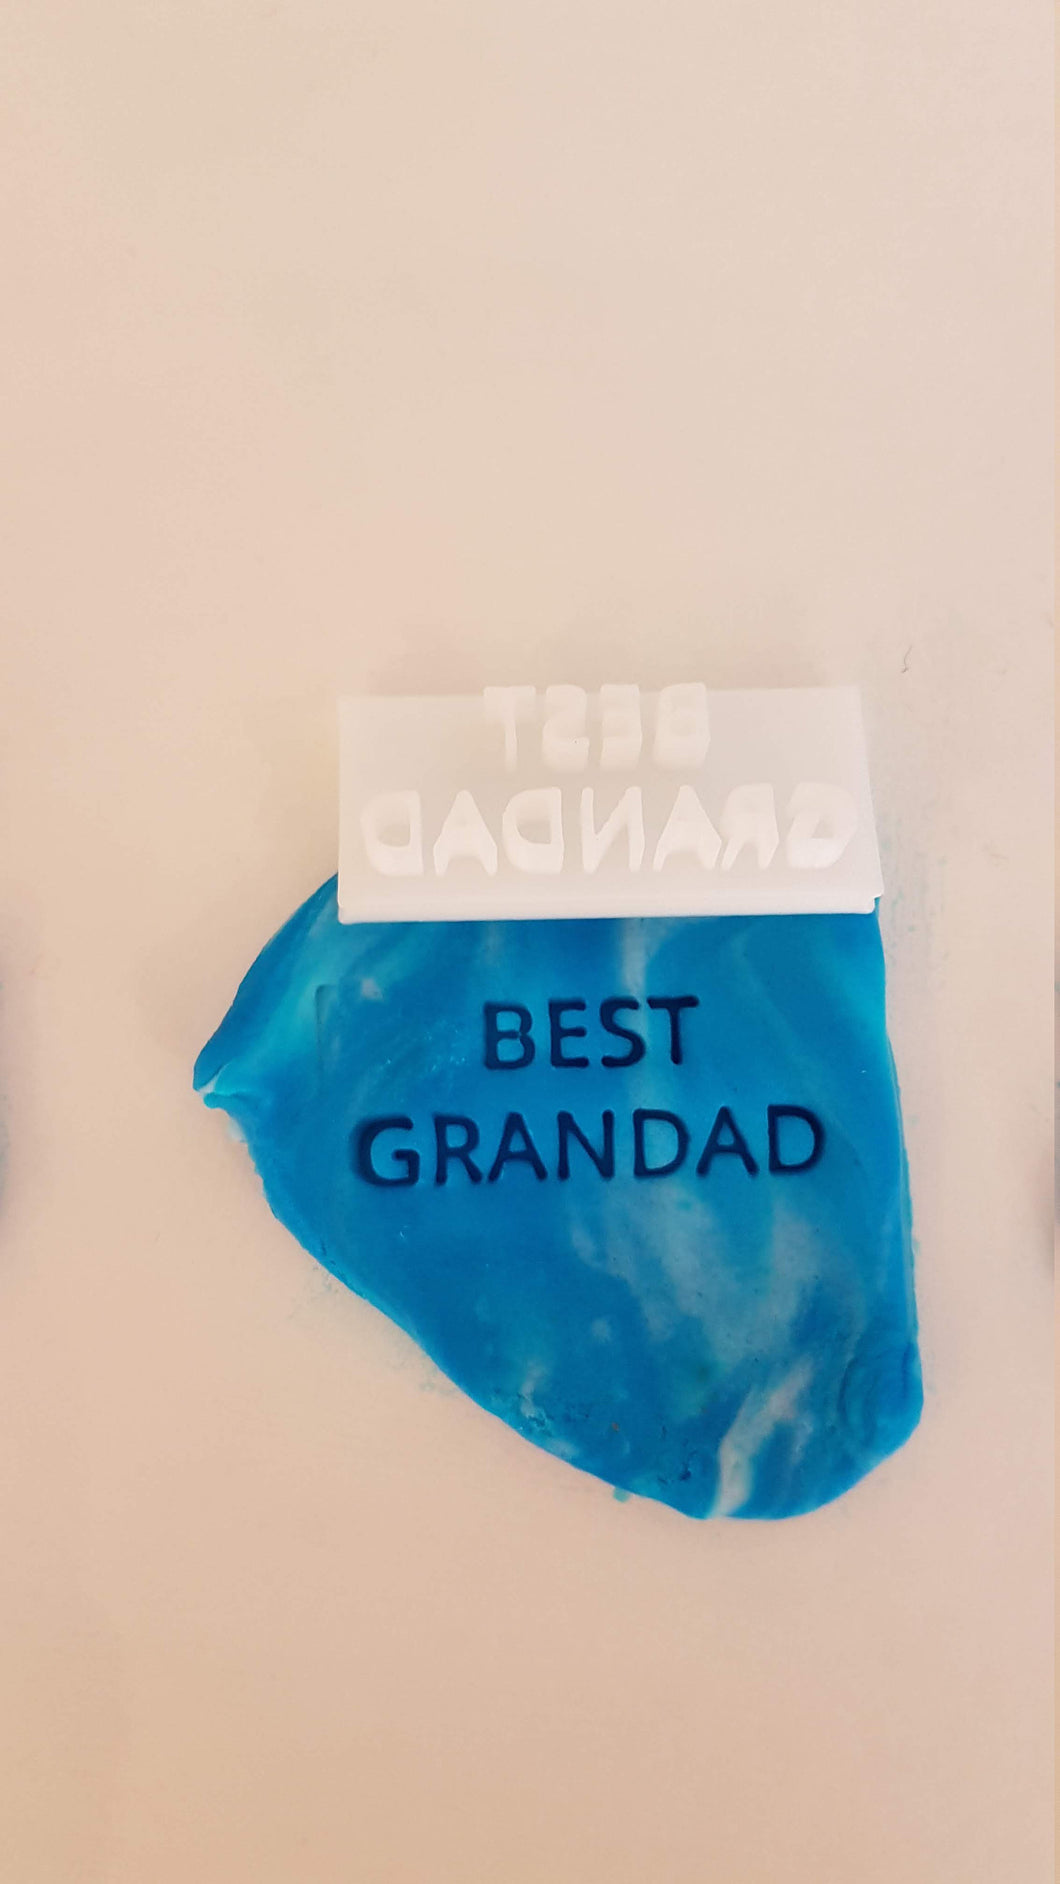 Best Grandad Stamp|Icing|Baking|Cookie Stamp|Father's Day Gift|Birthday|Husband|Partner|Daddy|Dad